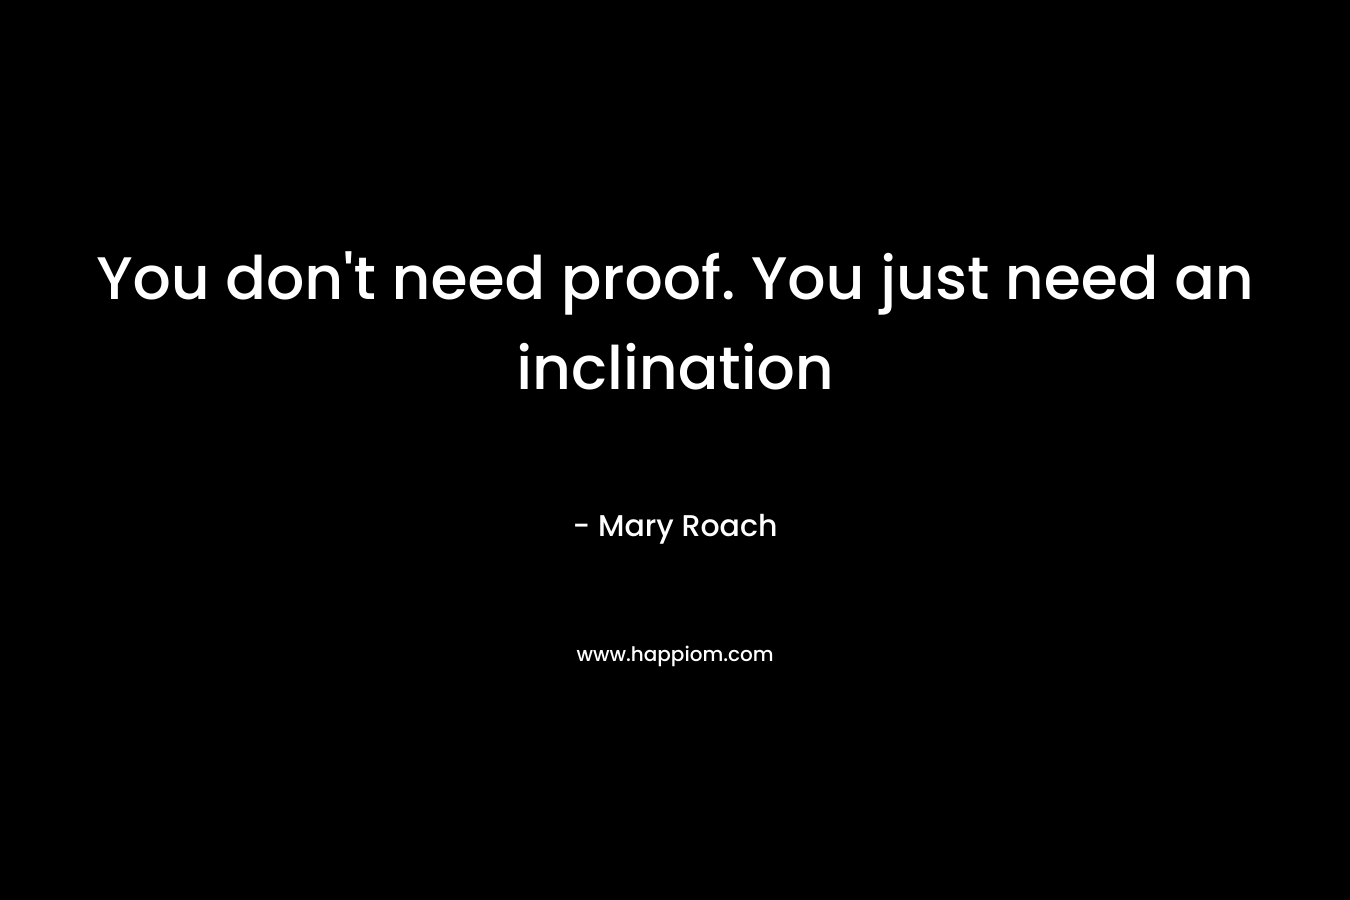 You don't need proof. You just need an inclination